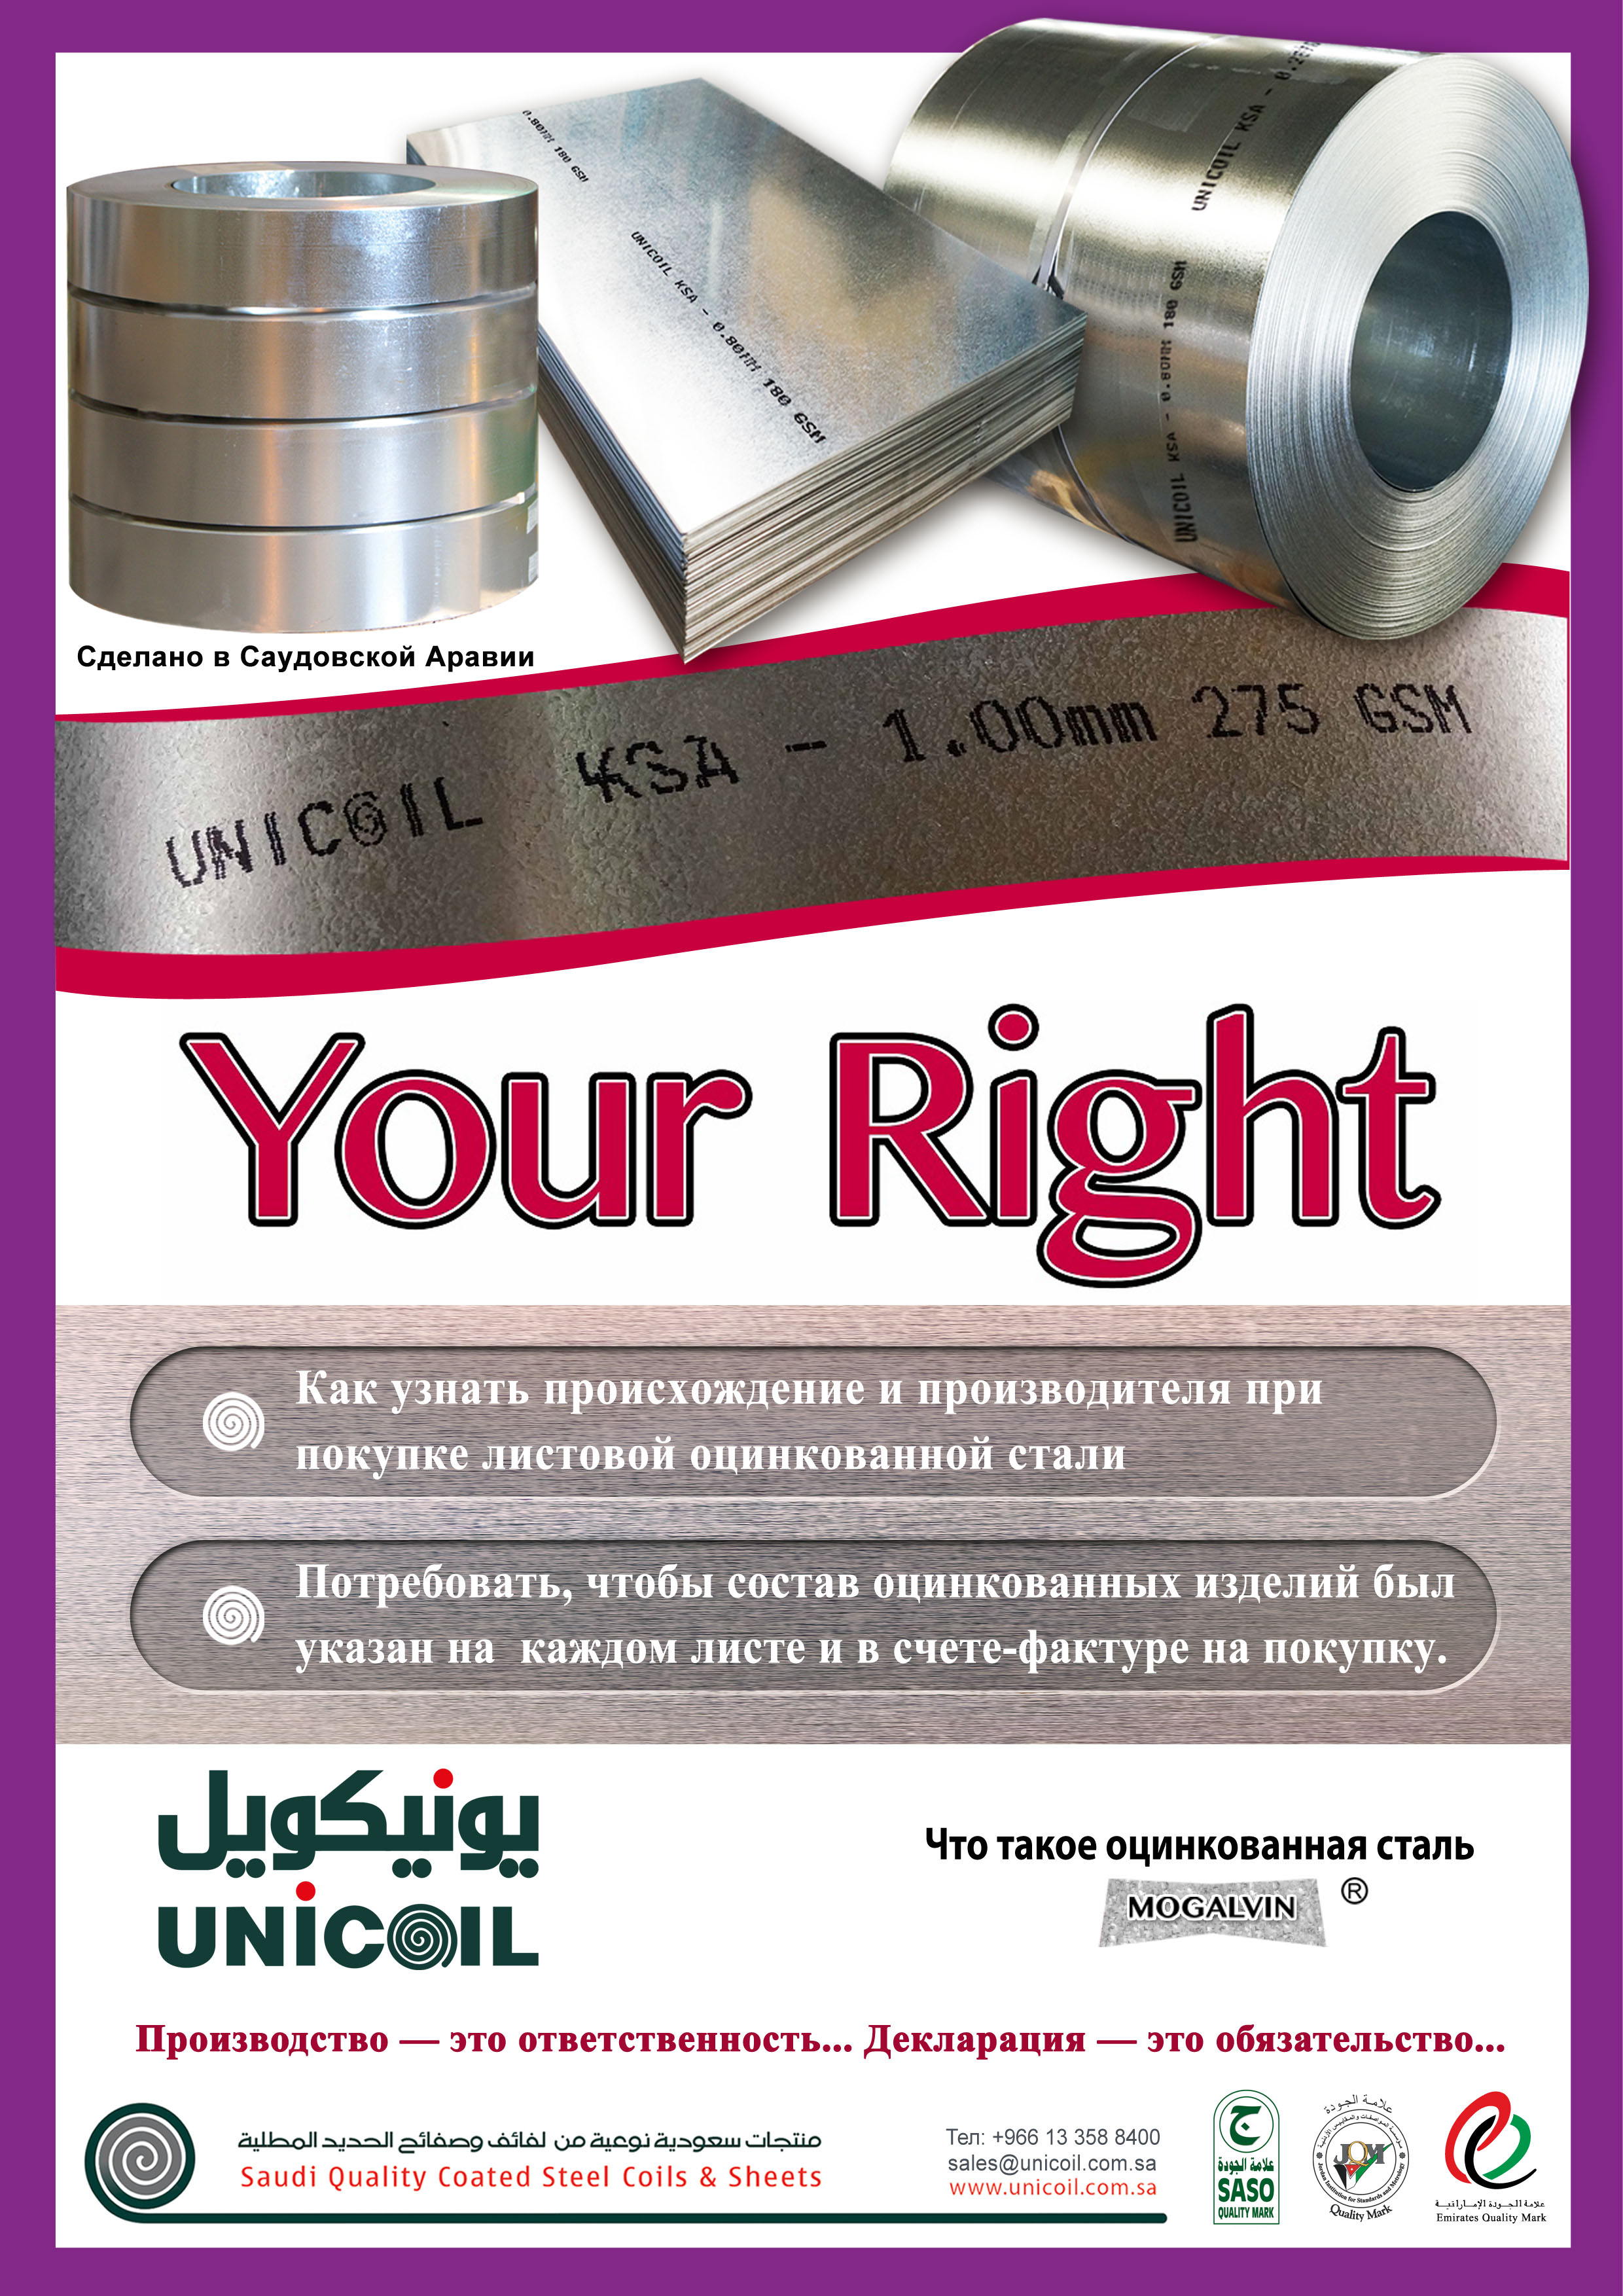 GI Products - Your Right